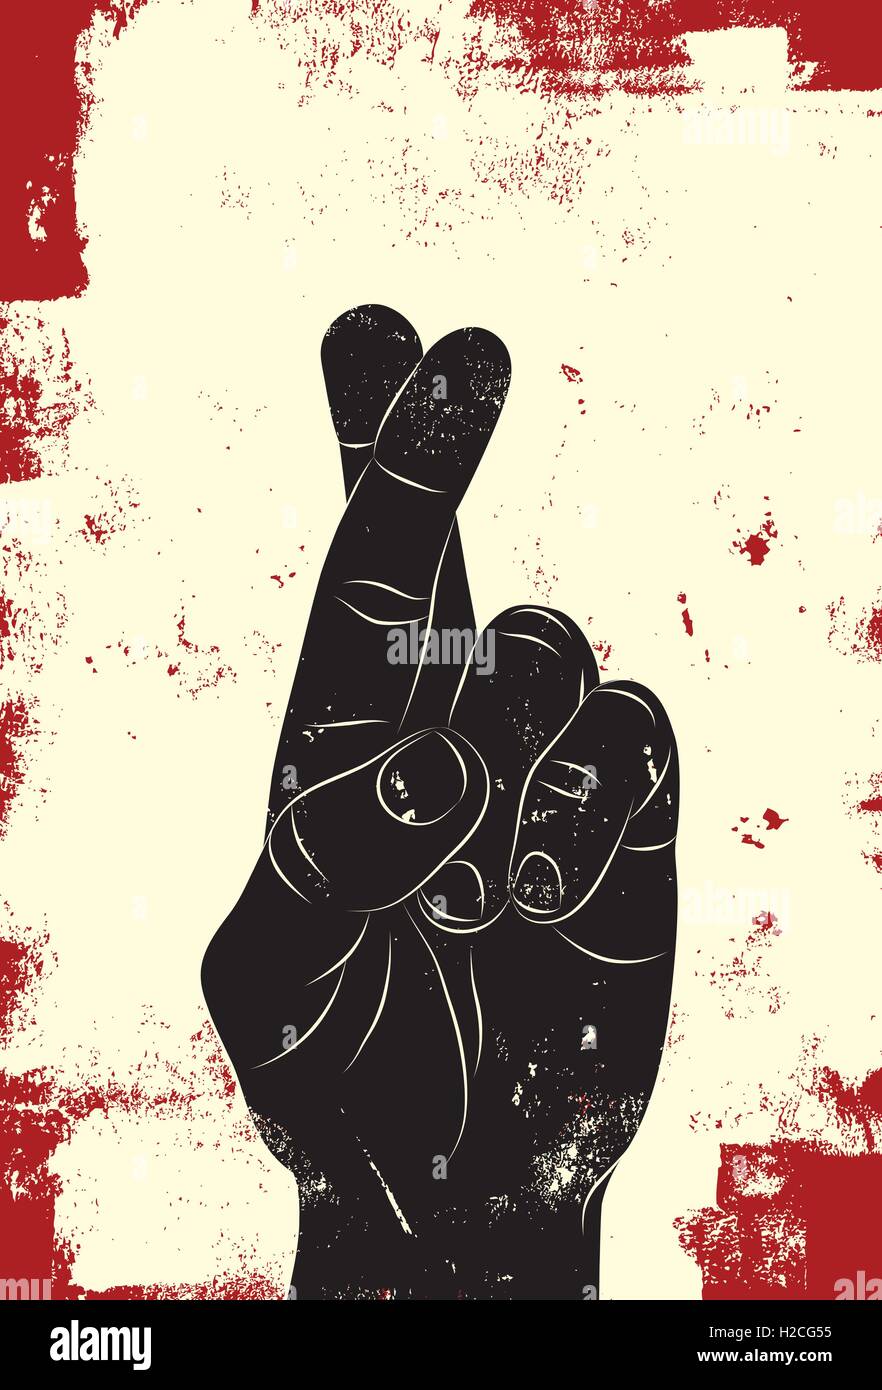 Fingers crossed Hand with fingers crossed for good luck behind a banner for text over a grunge background. Stock Vector